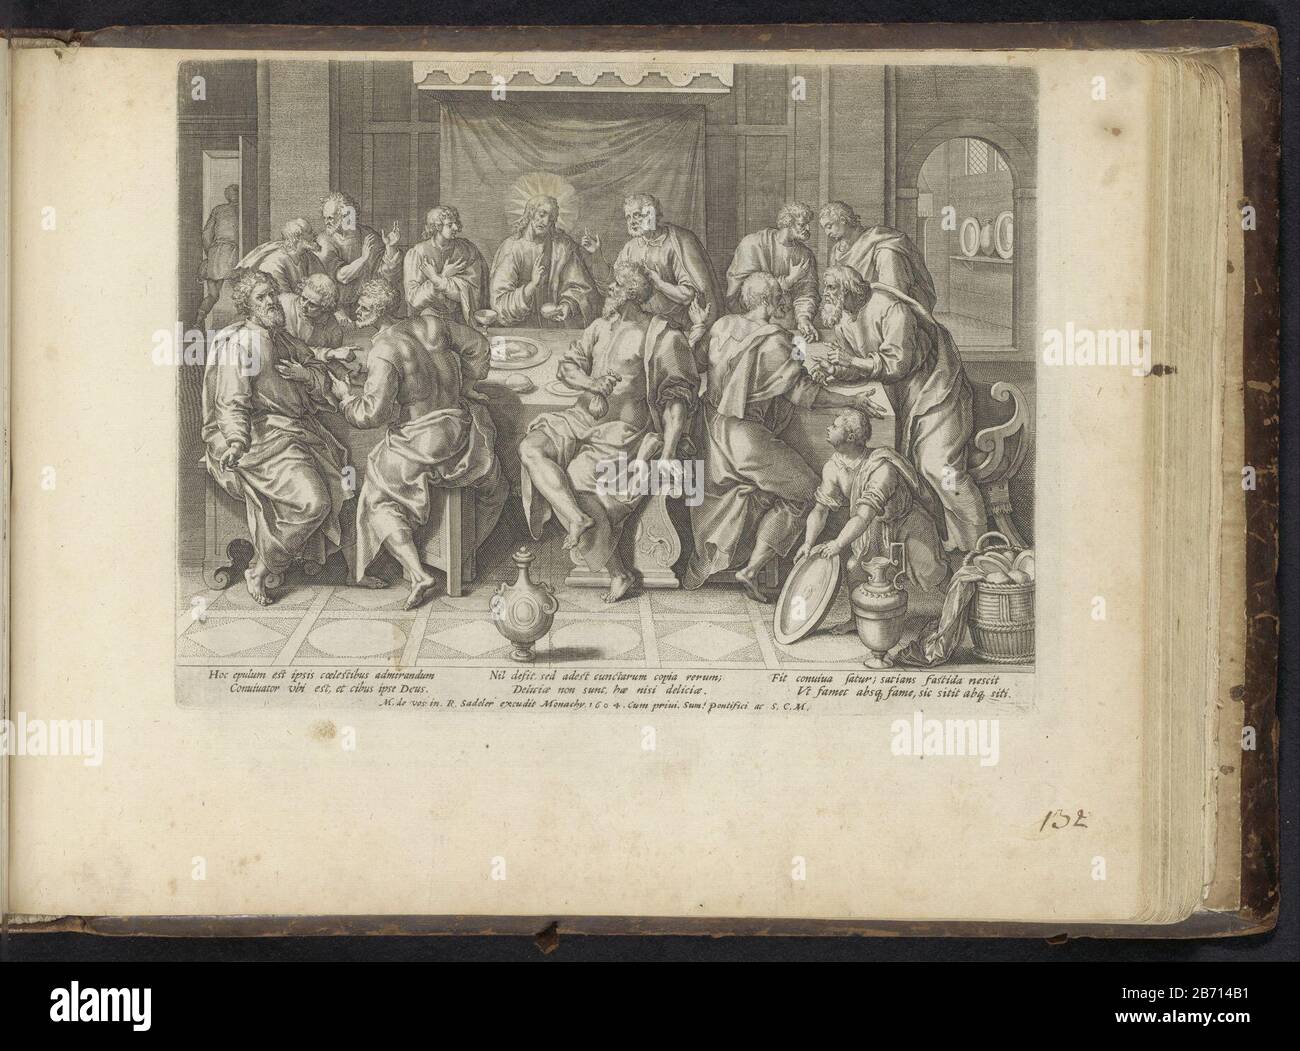 Laatste avondmaal Van het lyden en Passie Christi (serietitel) Den Grooten Figuer-Bibel (serietitel) Christ is with his disciples at the last supper. Central to the fore Judas with the bag of silver in his hand. Under the performance text in Latin. This print is part of a album. Manufacturer : printmaker: Raphael Sadelernaar design: Marten de Vos (listed building) Publisher: Raphael Sadeler (listed building) publisher Claes Jansz. Visscher (II) (possible) Editor: Jan Philipsz Schabaeljeverlener of privilege: Clement VIII (listed property) Place manufacture: printmaker: München Publisher: Münch Stock Photo